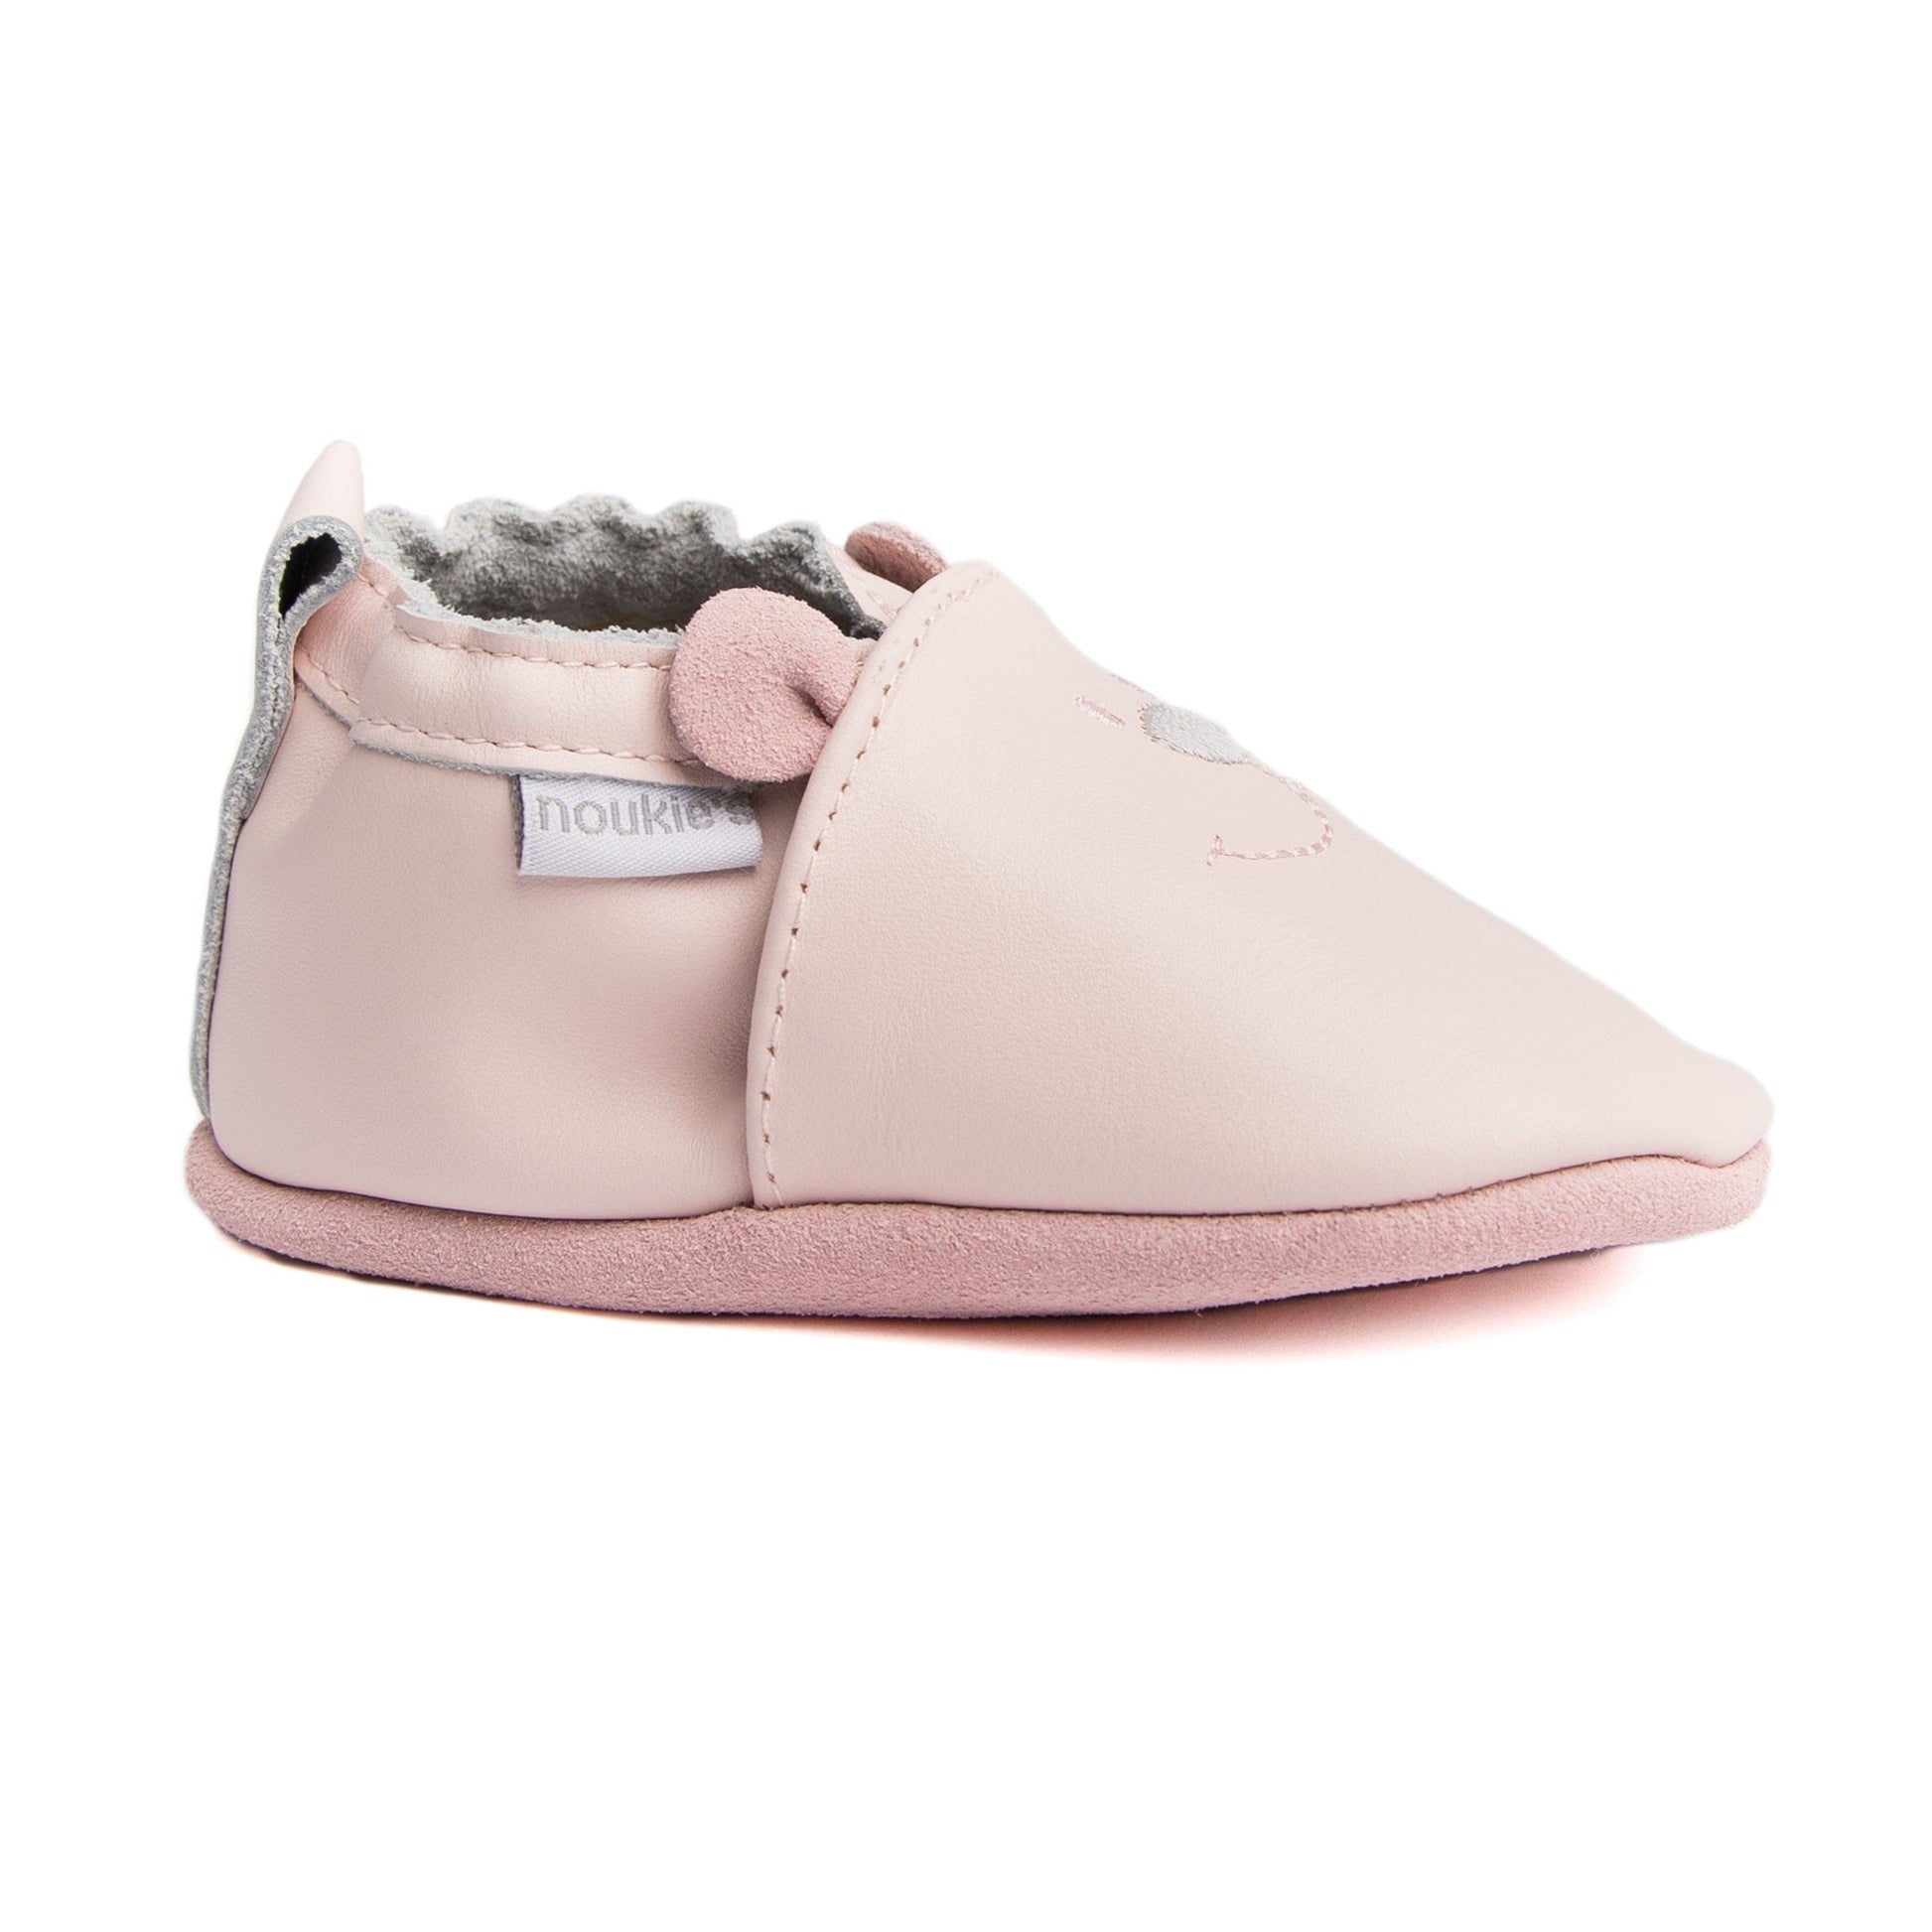 Noukie's Footwear Soft pink leather moccasins